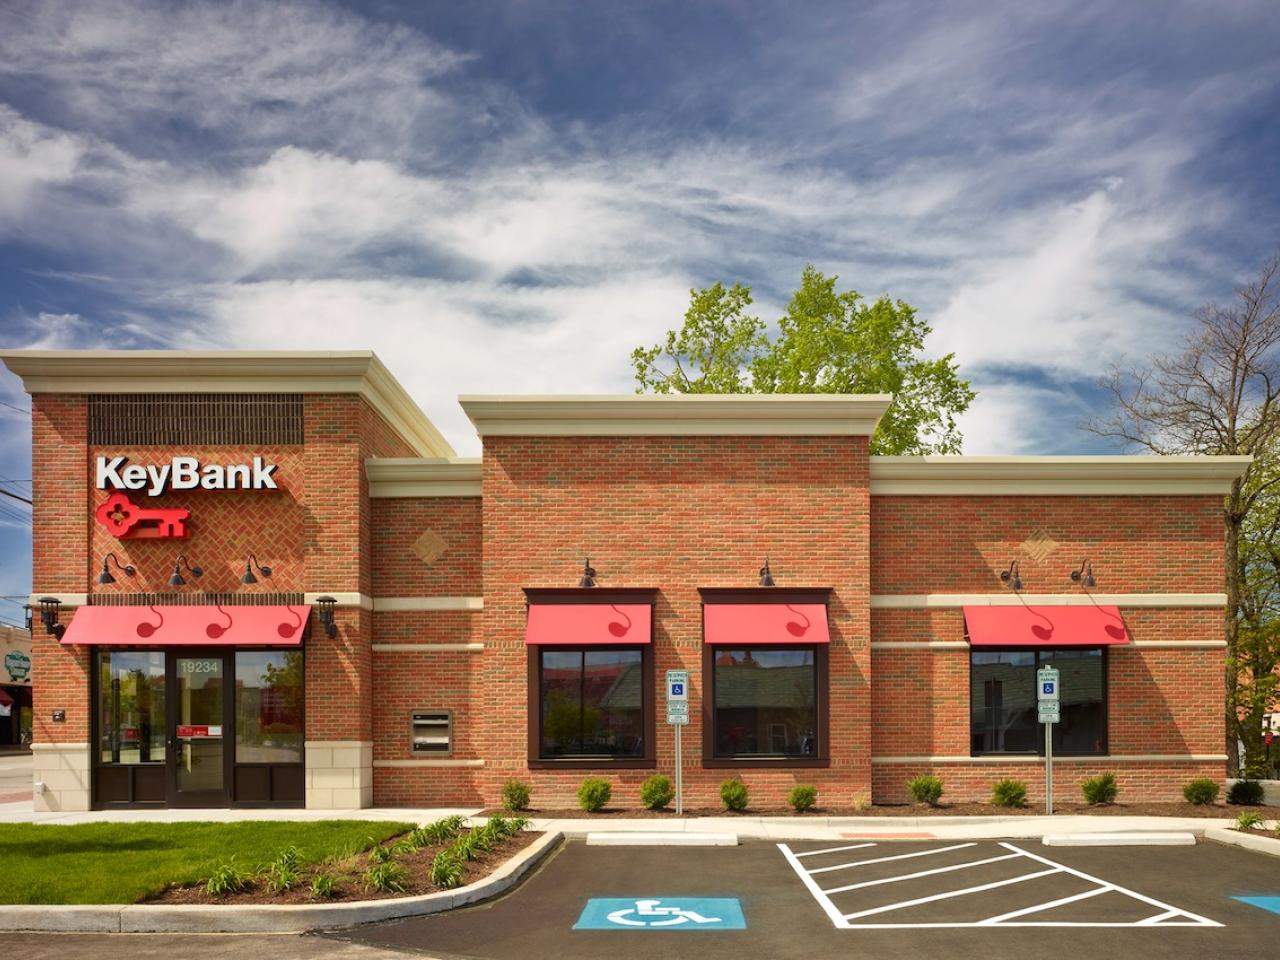 KeyBank branch rendering showing exterior of the branch.